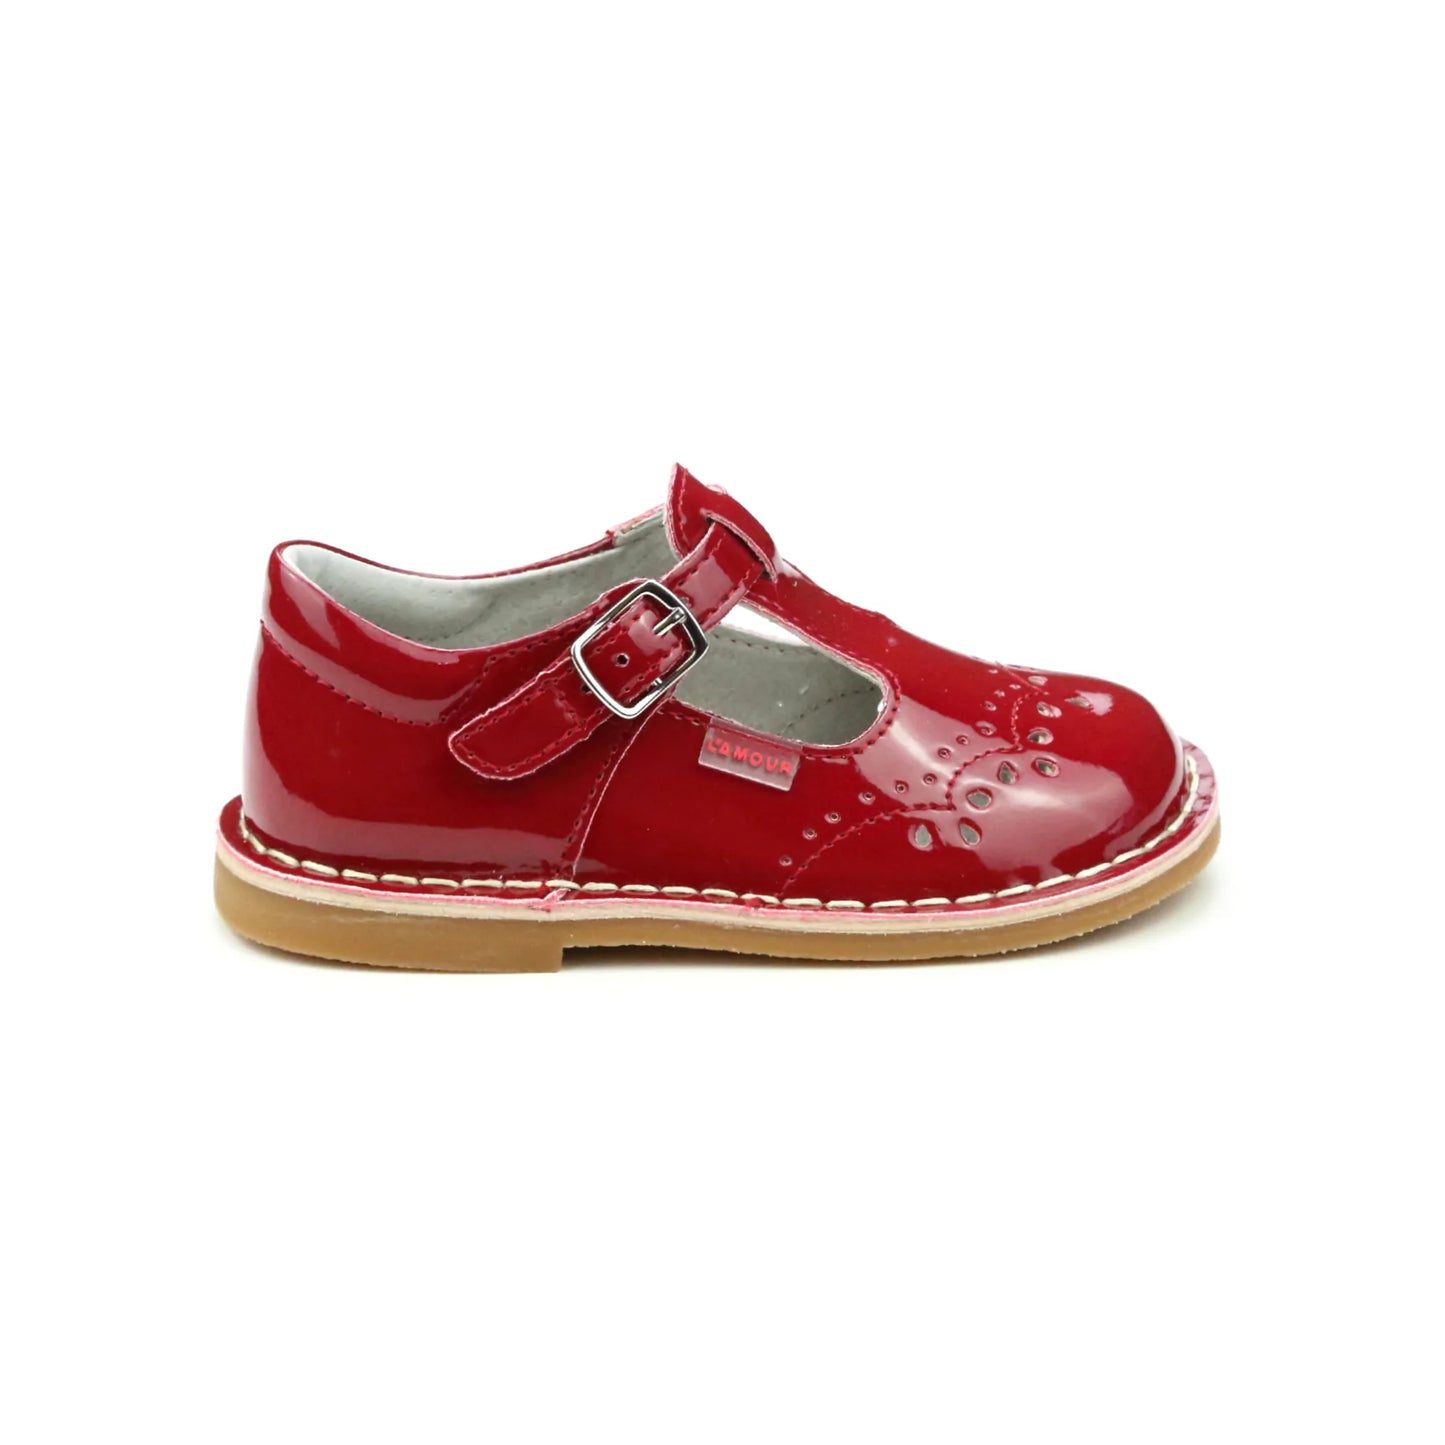 LAMOUR RUTHIE STITCH SHOE - PATENT RED